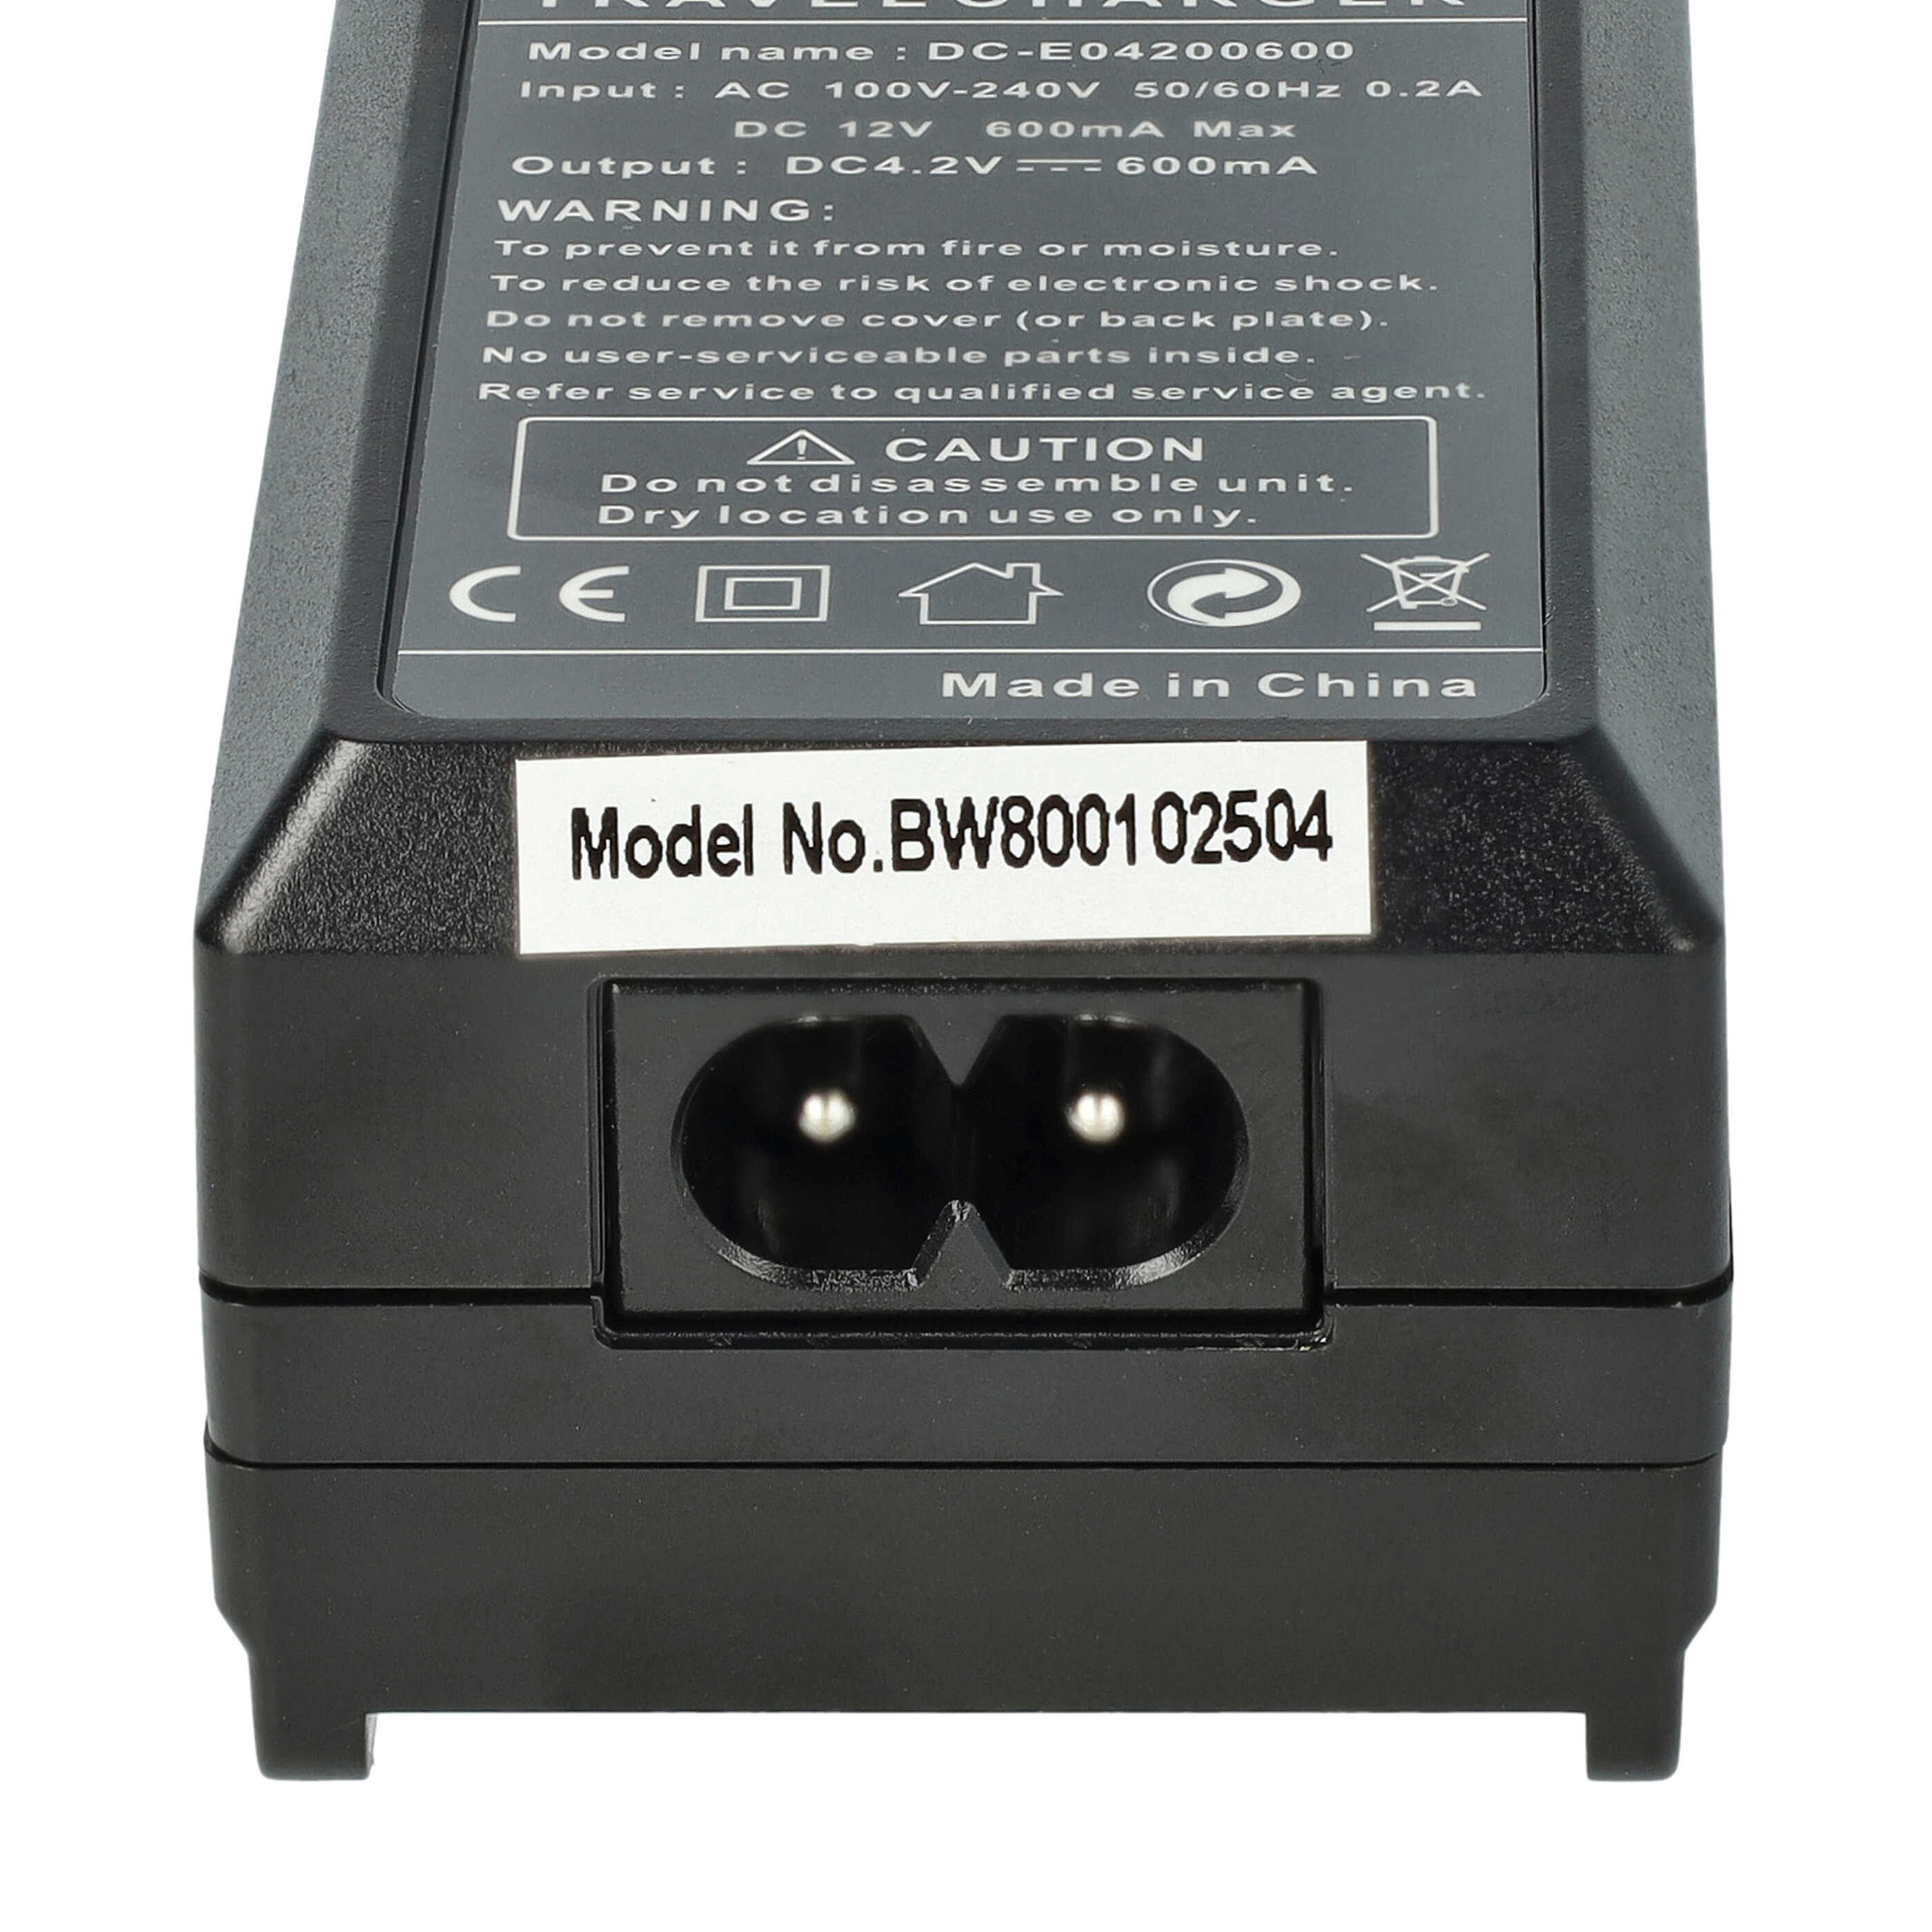 Battery Charger suitable for Casio NP-130 Camera etc. - 0.6 A, 4.2 V